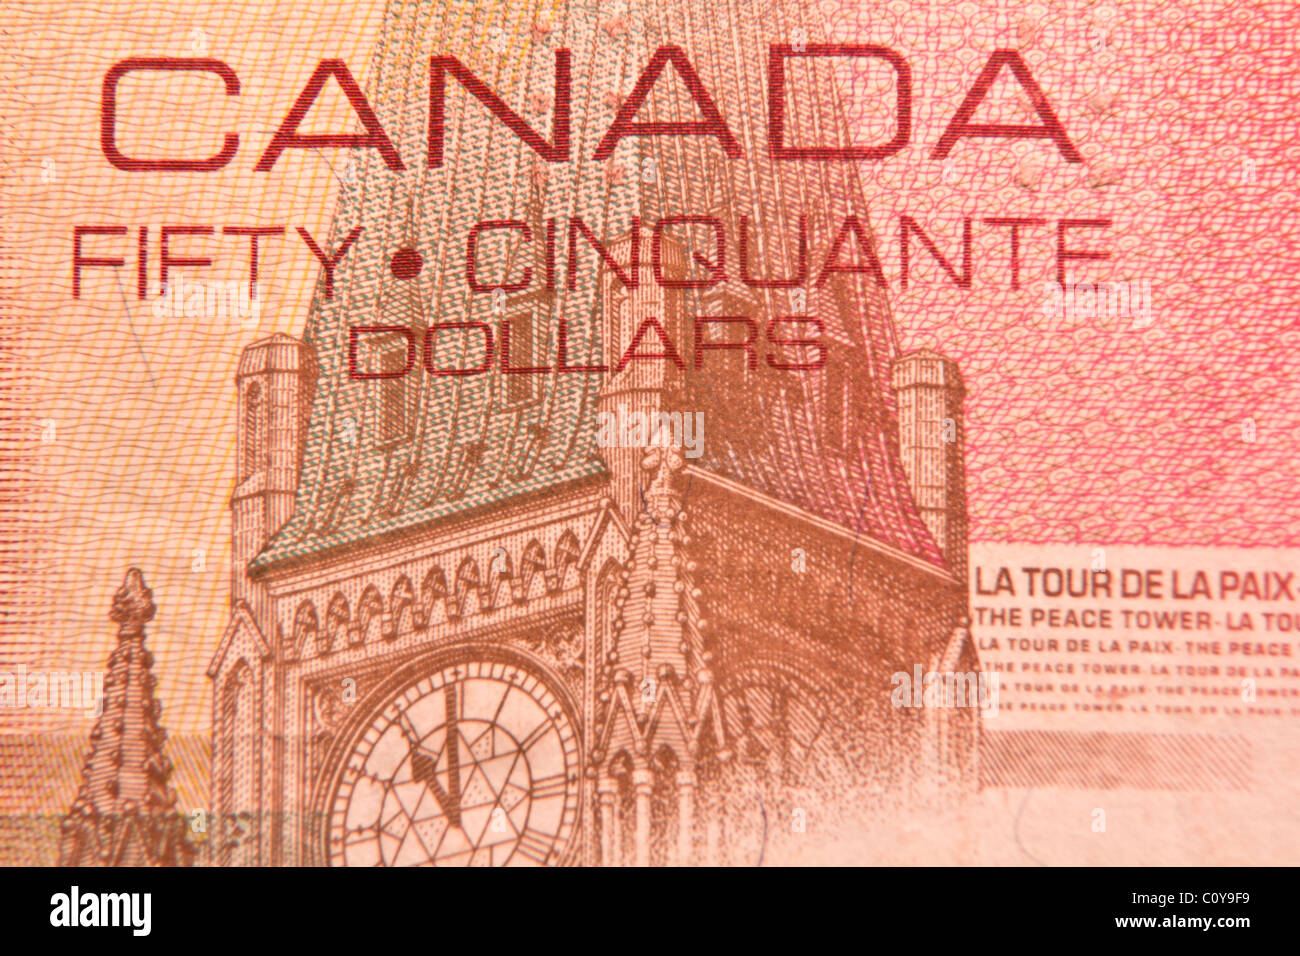 Canadian fifty-dollar note - Wikipedia